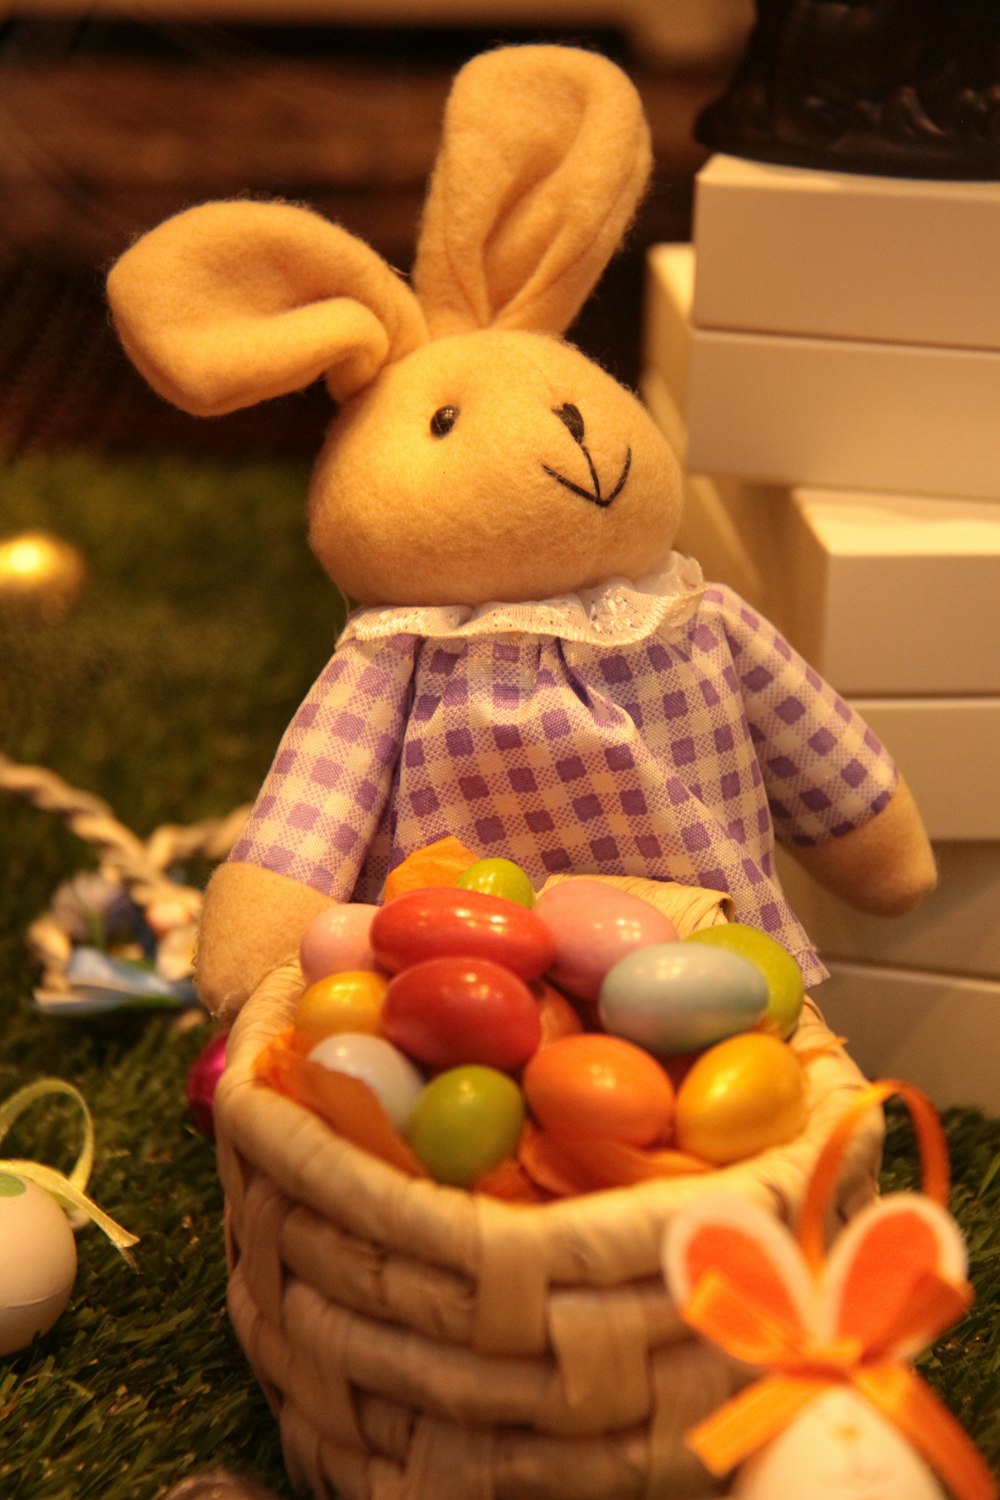 a stuffed rabbit sitting next to a basket of eggs